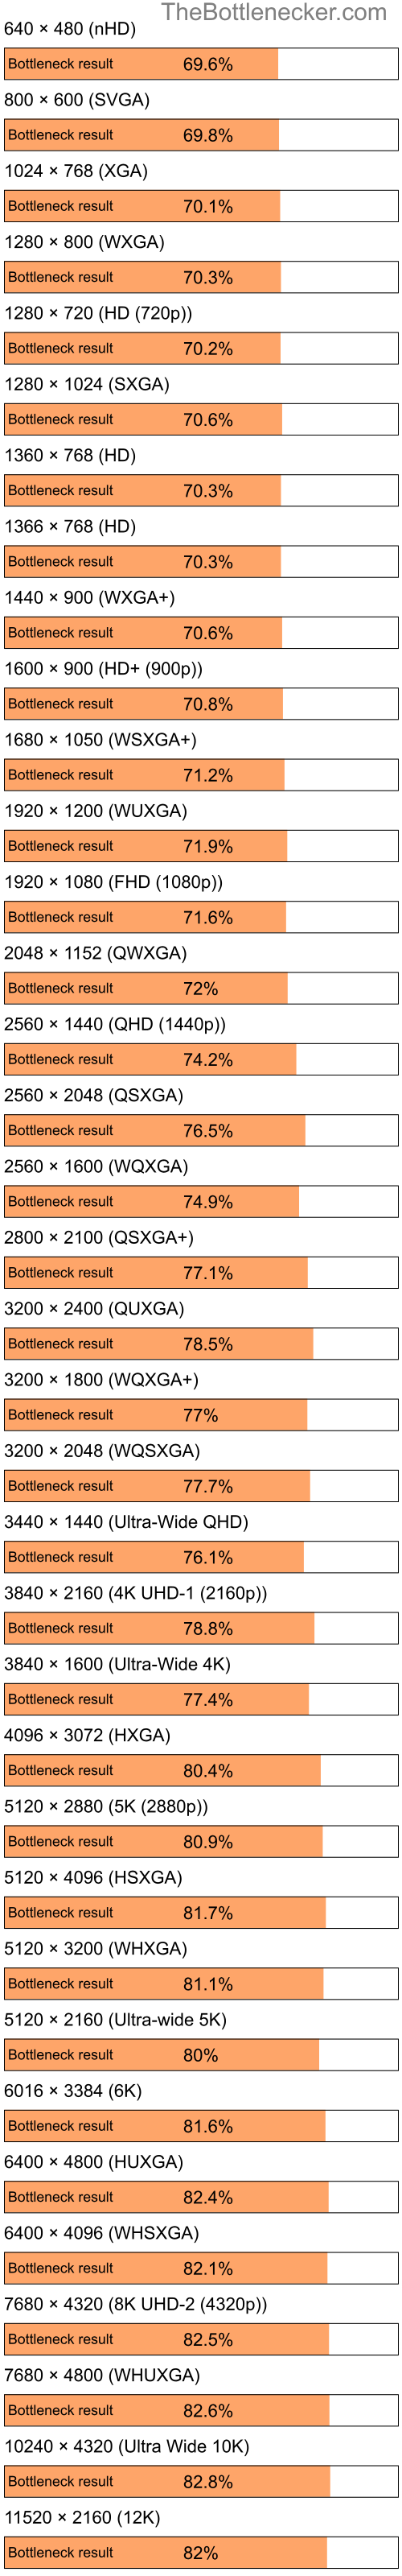 Bottleneck results by resolution for Intel Pentium 4 and NVIDIA Quadro FX 550 in General Tasks